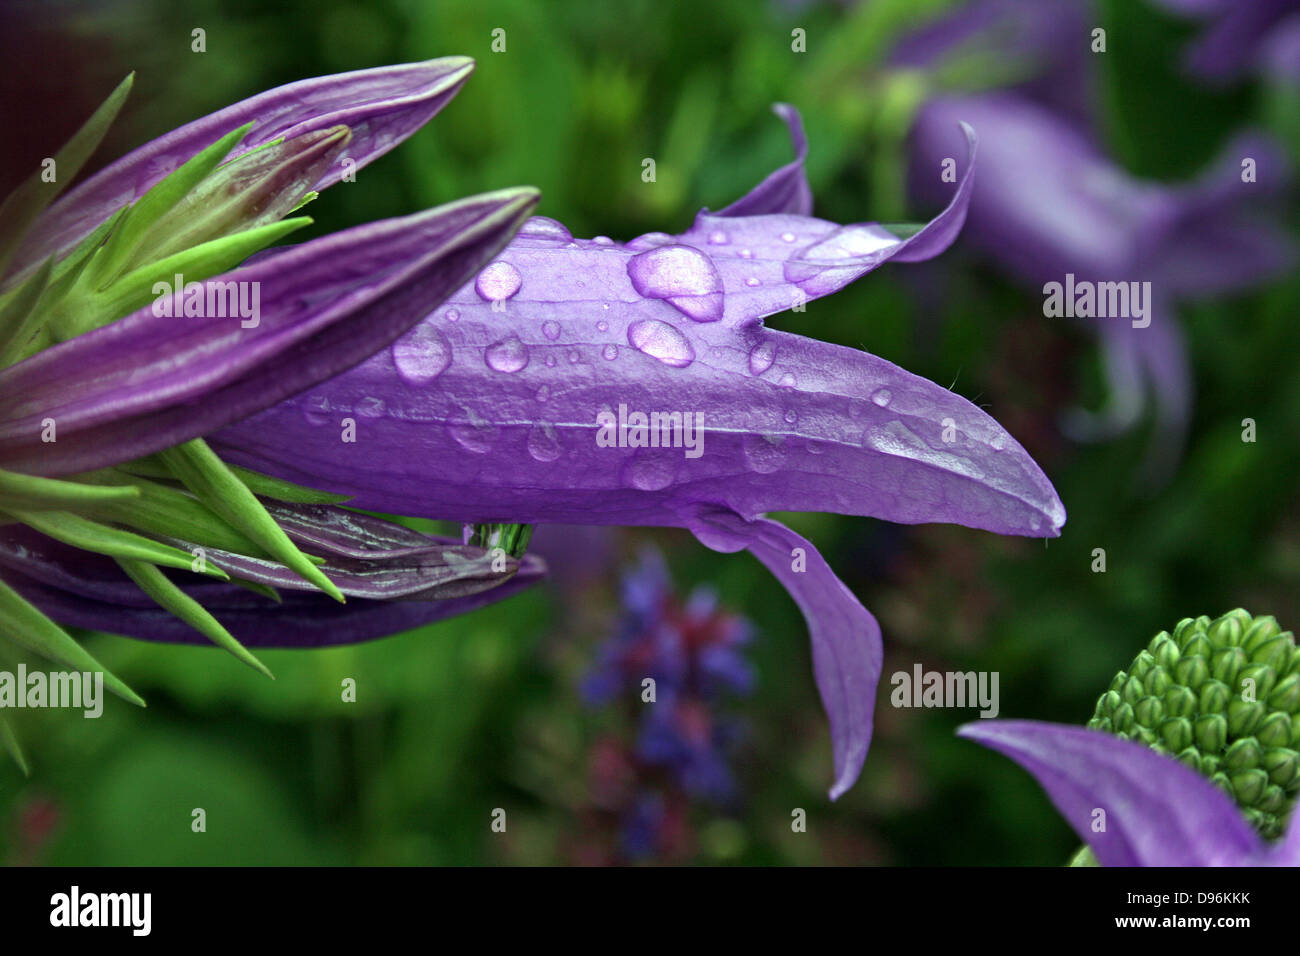 Campanula, ,Bellflower in a rich purple/blue flower covered in raindrops. Stock Photo